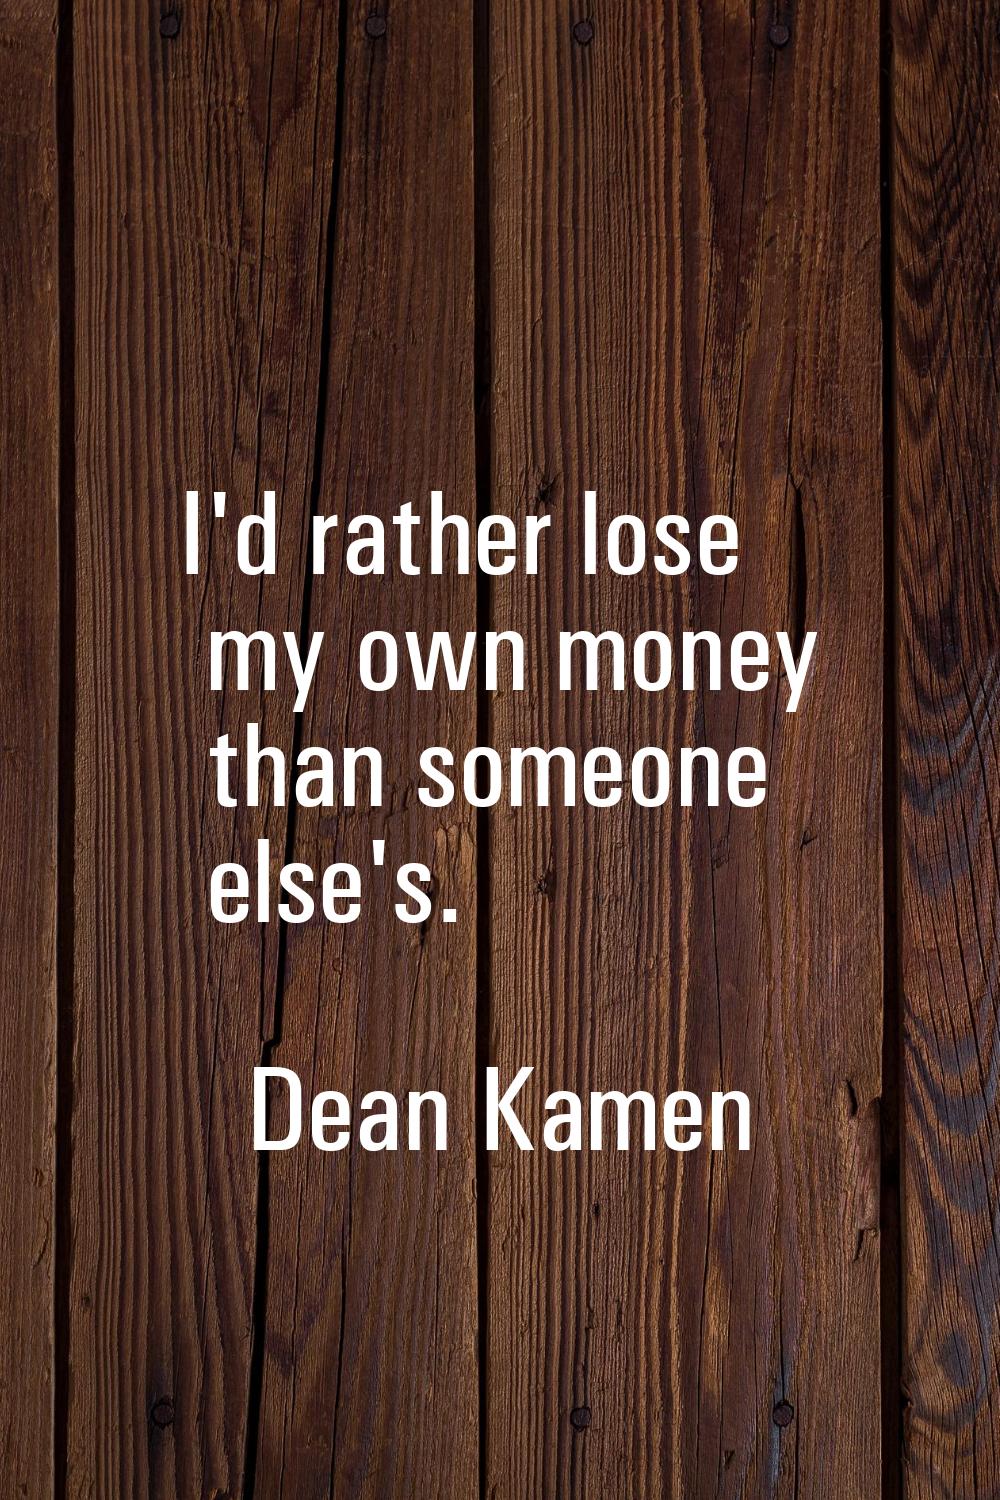 I'd rather lose my own money than someone else's.